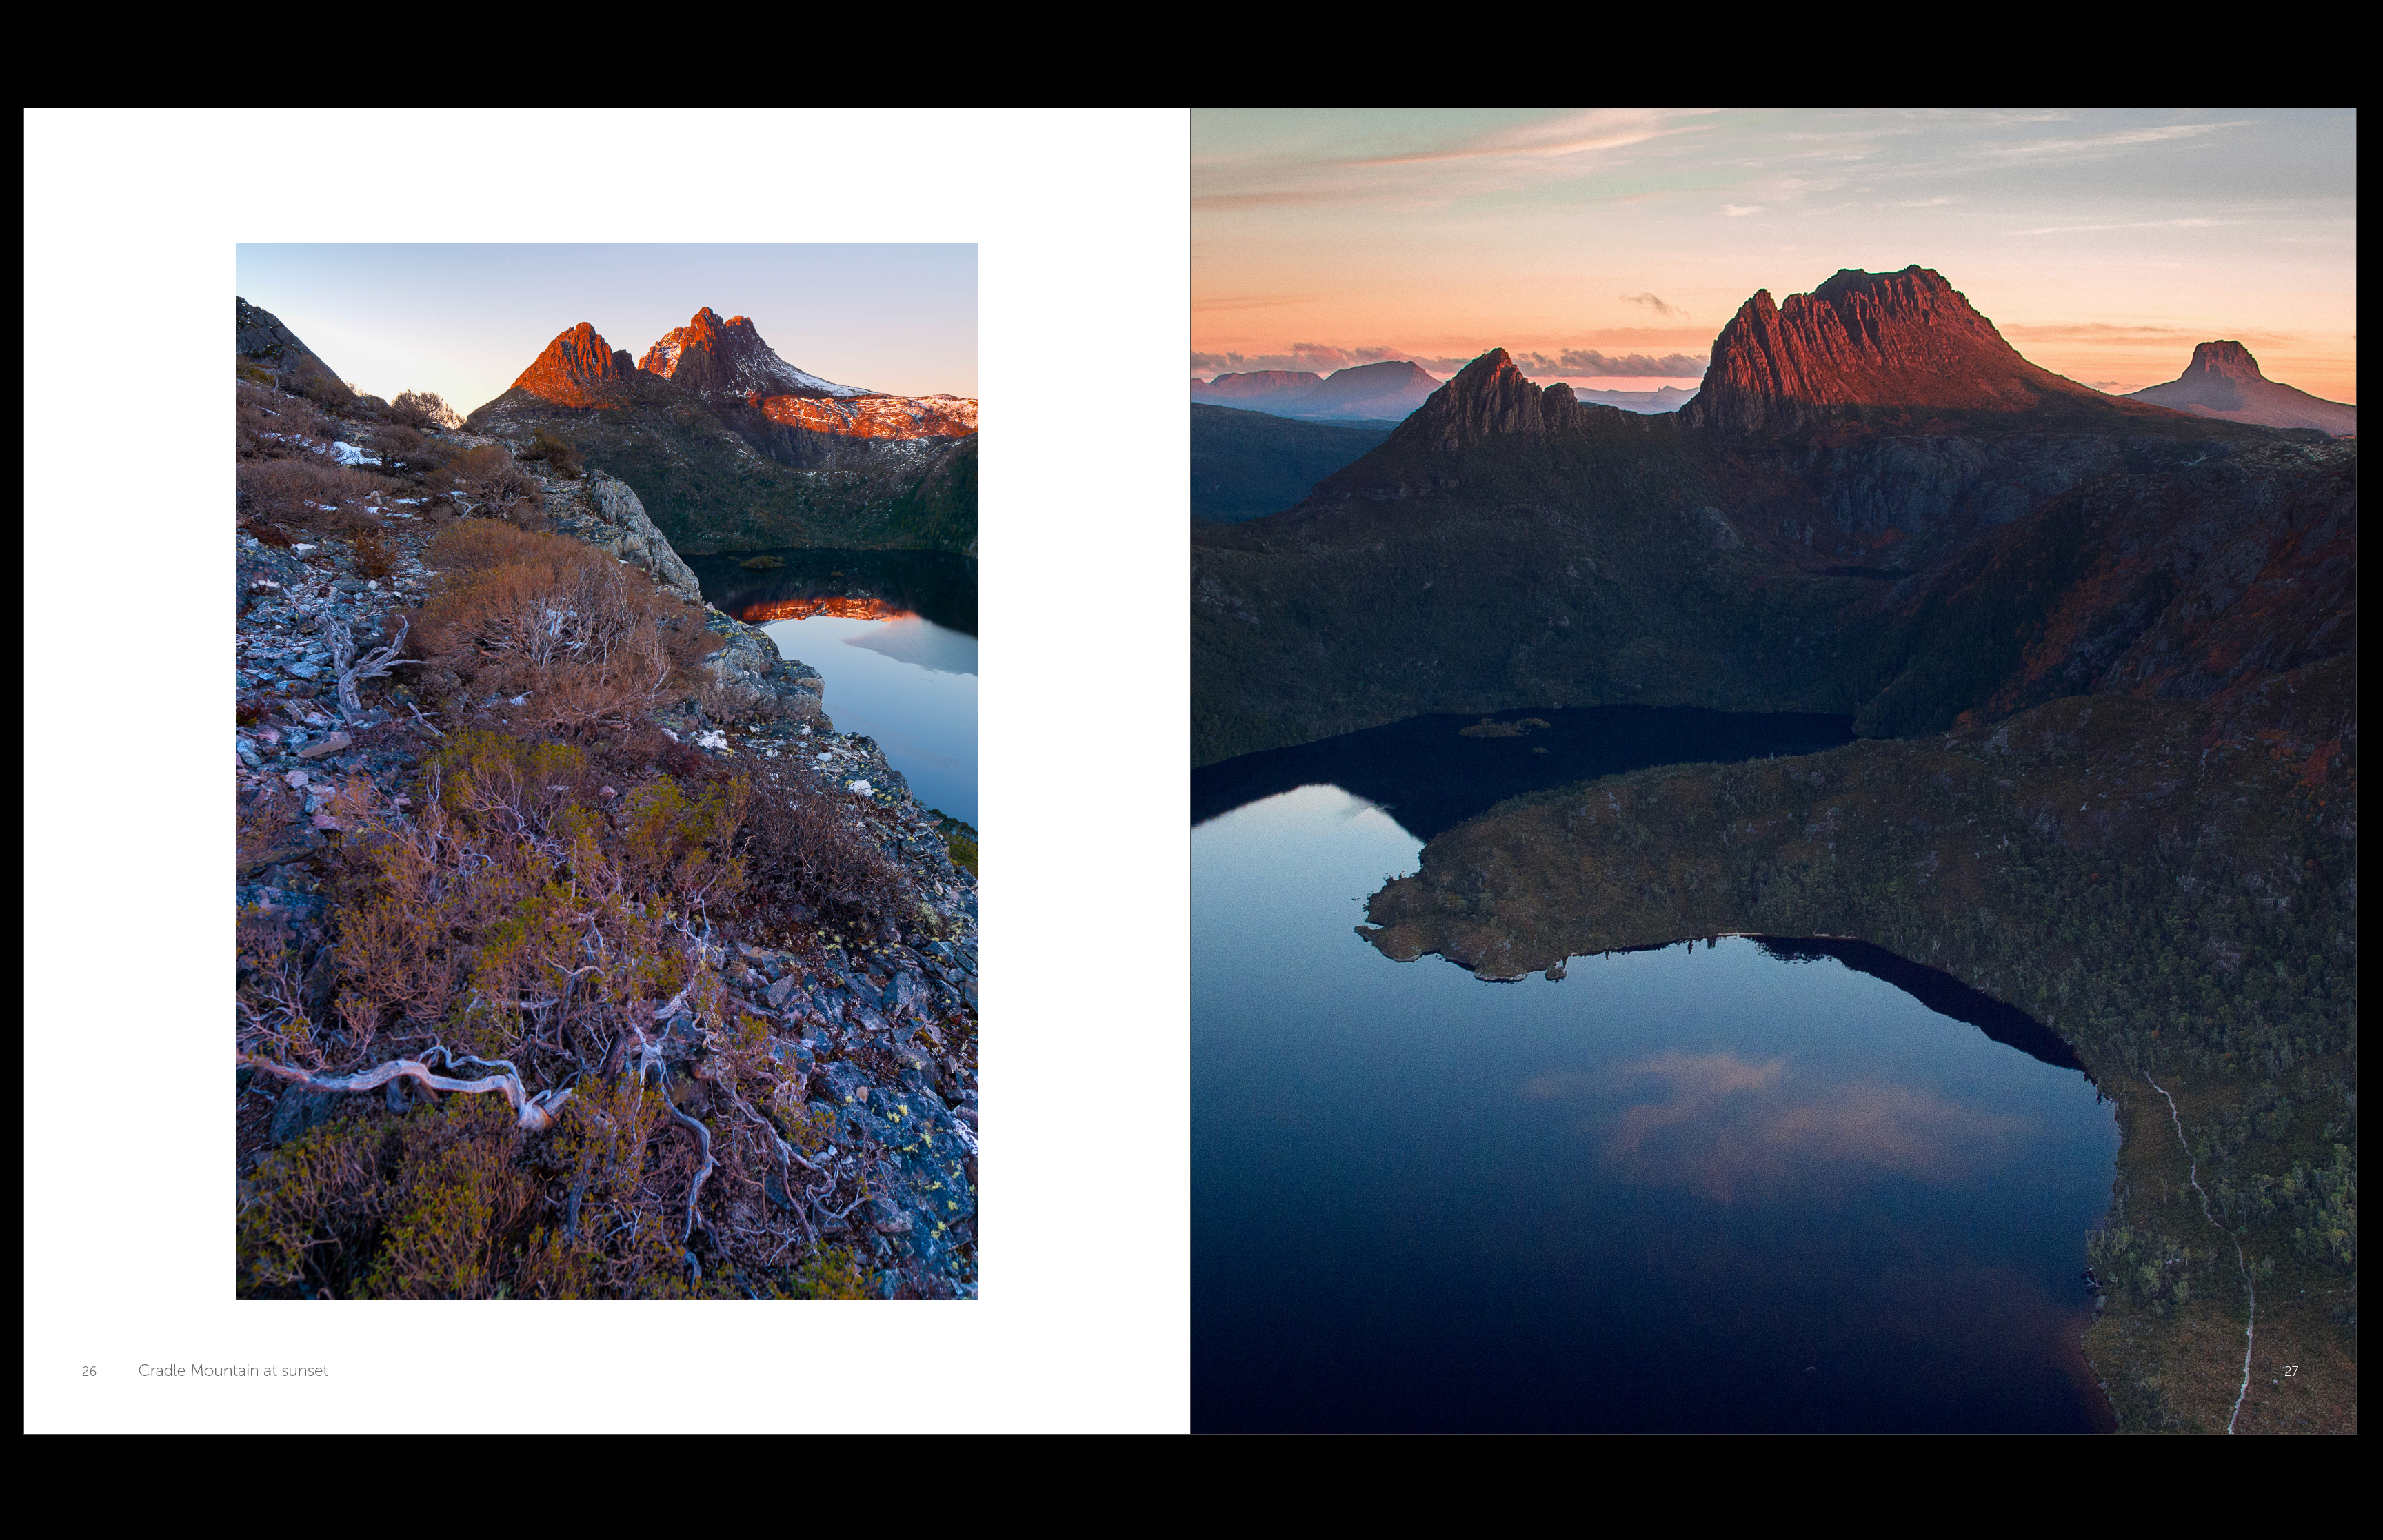 Cradle Mountain & The Overland Track book QR